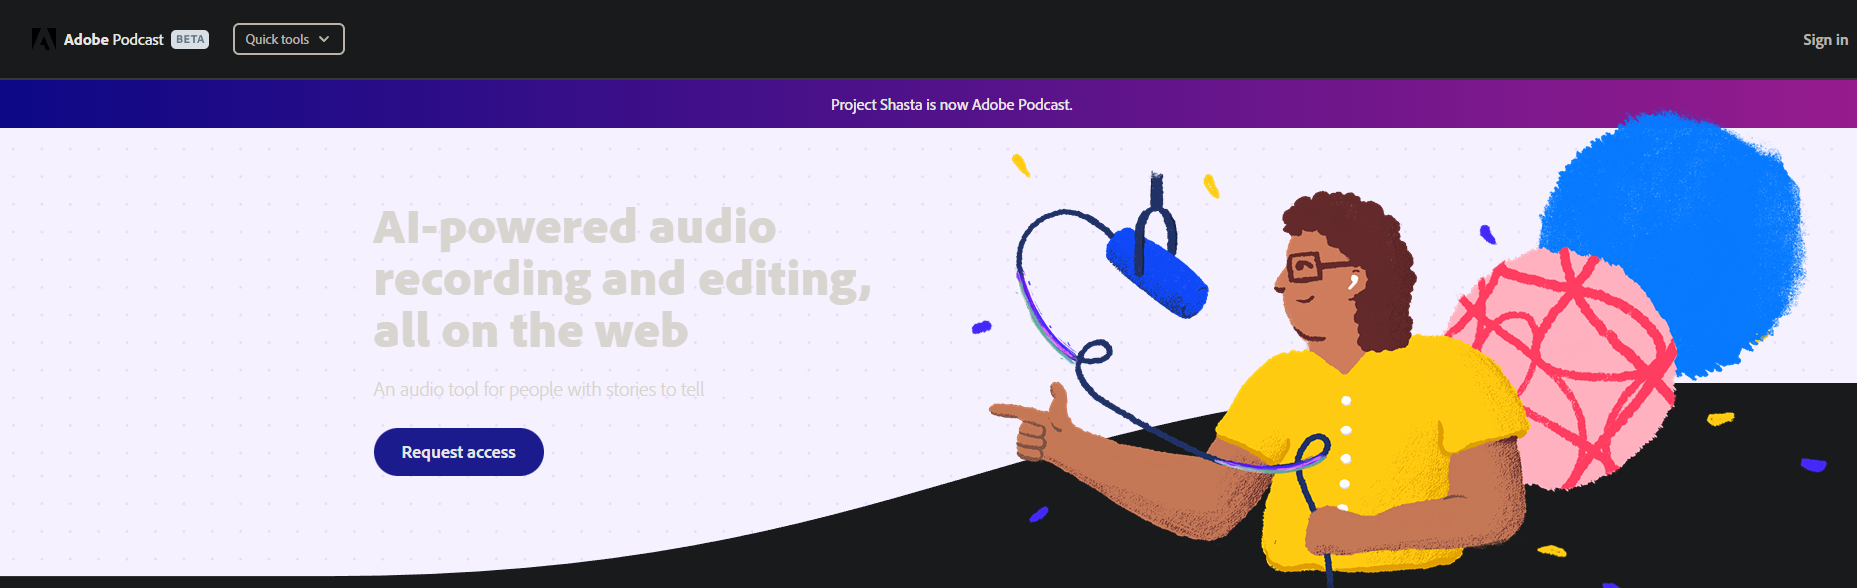 How to get access to adobe podcast